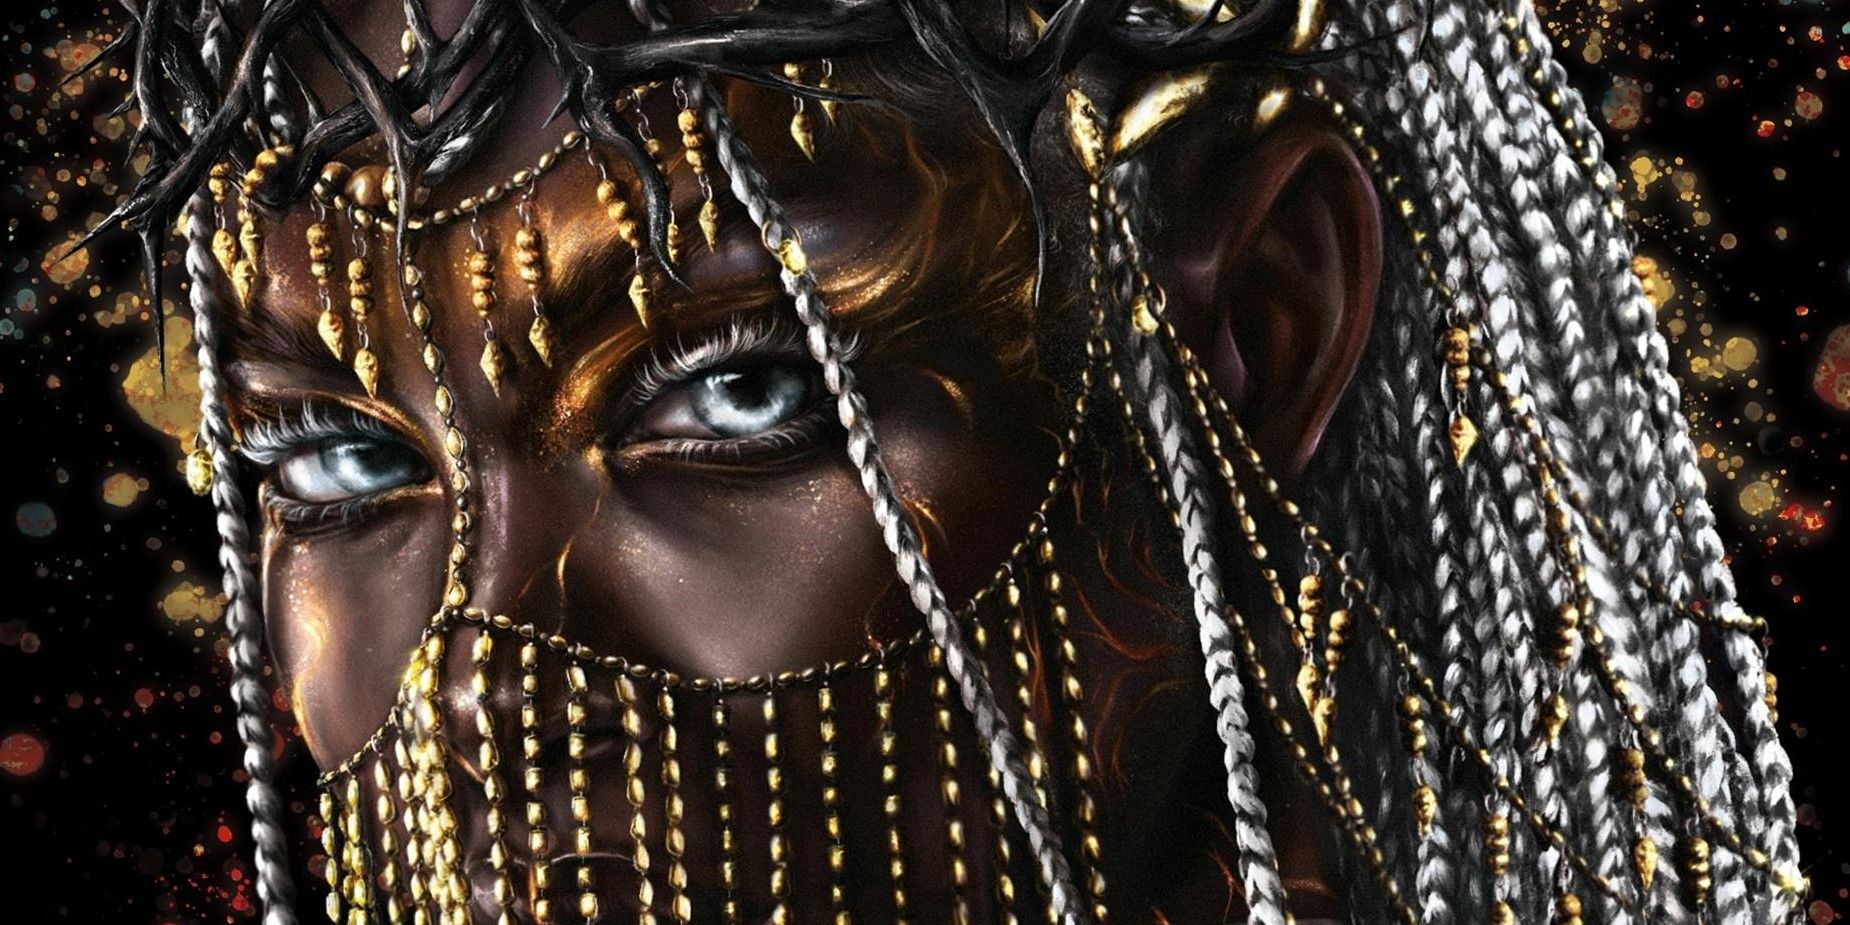 A Black woman with bright blue eyes and gold jewelry covering her fact on the cover of Children of Anguish and Anarchy